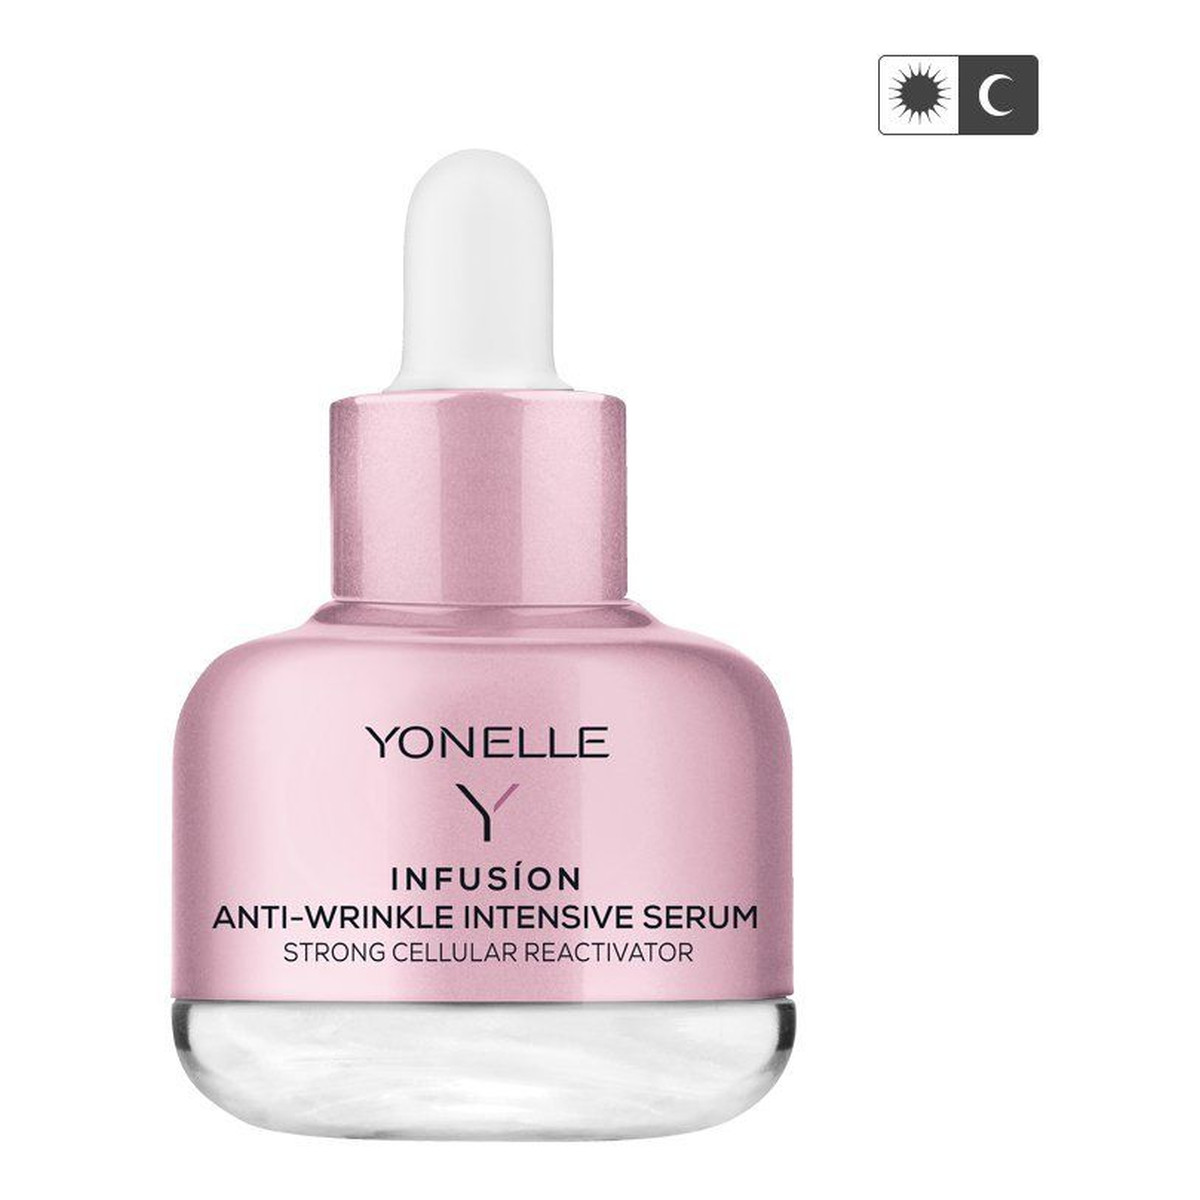 Yonelle Infusion Anti-Wrinkle Intensive intensywne 30ml